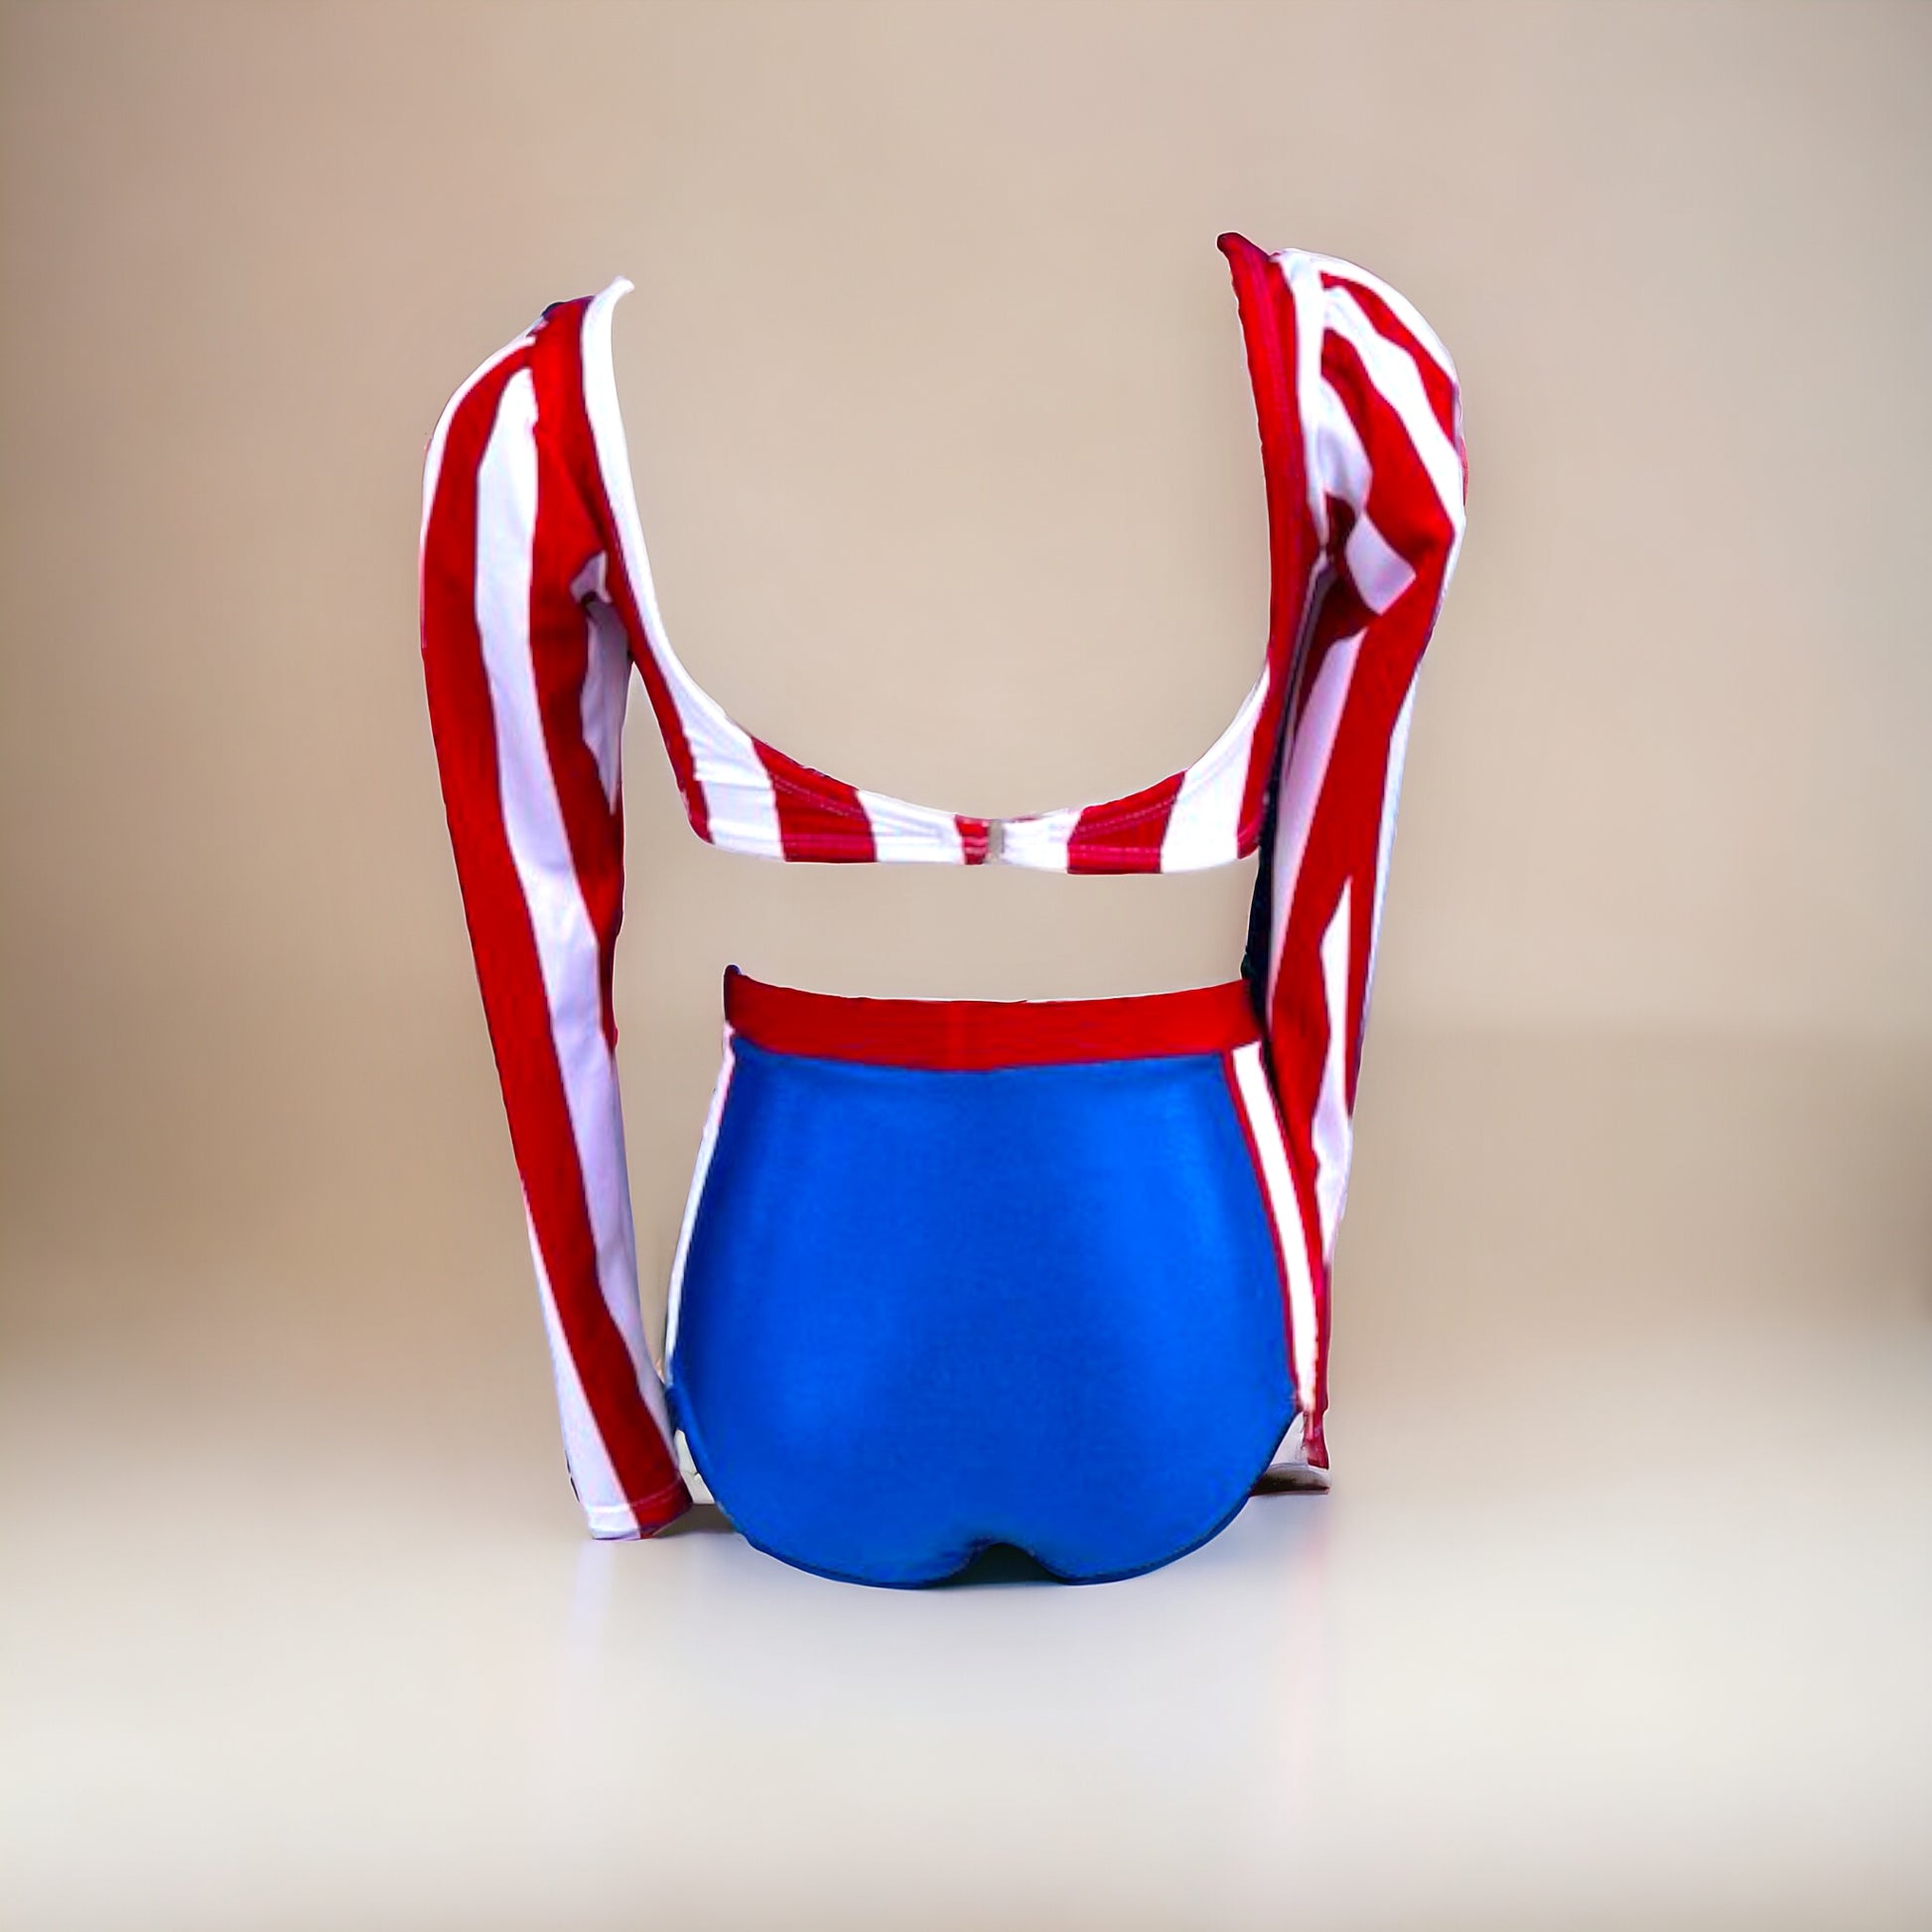 Get ready to rock the stage with our bandstand-inspired leotard! With metallic blue, white, and red stripes, puffed shoulders, and a high-waisted faux two-piece design, this show-stopping ensemble will make every performance a hit. Unleash your inner diva and dance with attitude in this unstoppable leotard by Opra Dancewear.